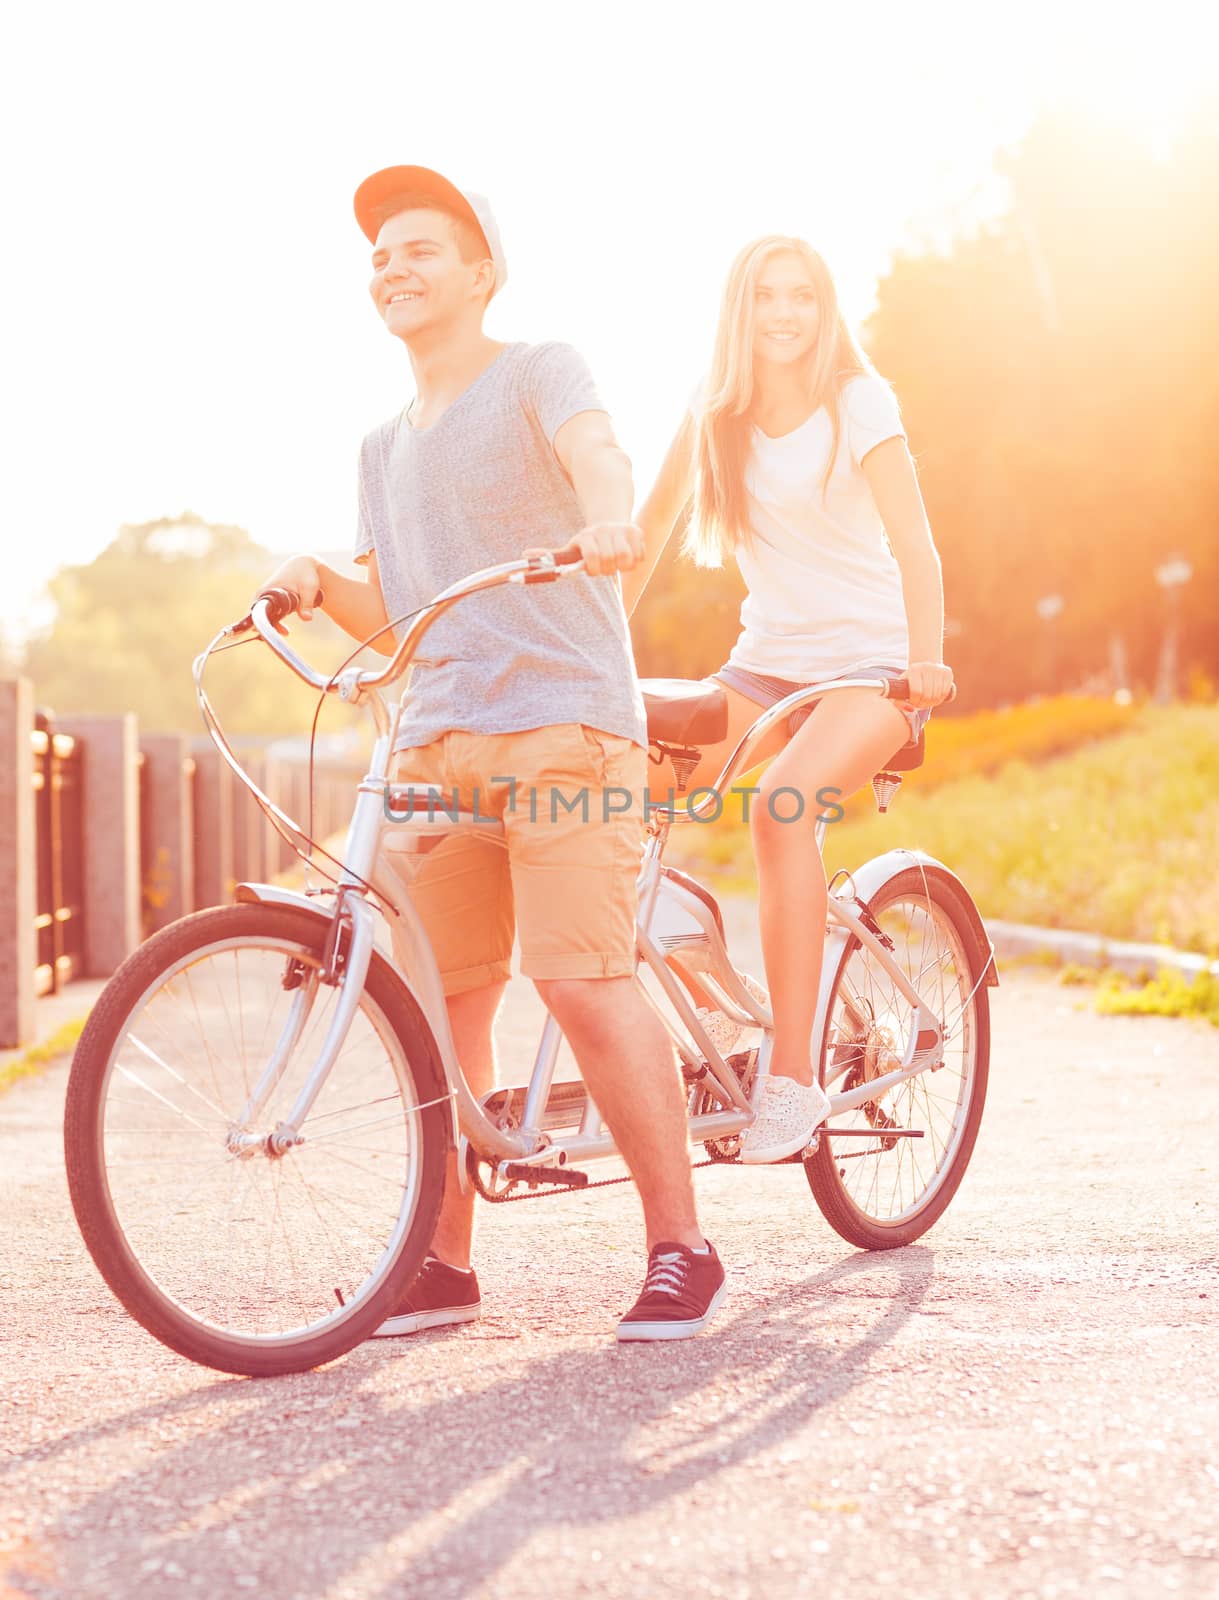 Happy couple - man and woman riding a bicycle in the city street